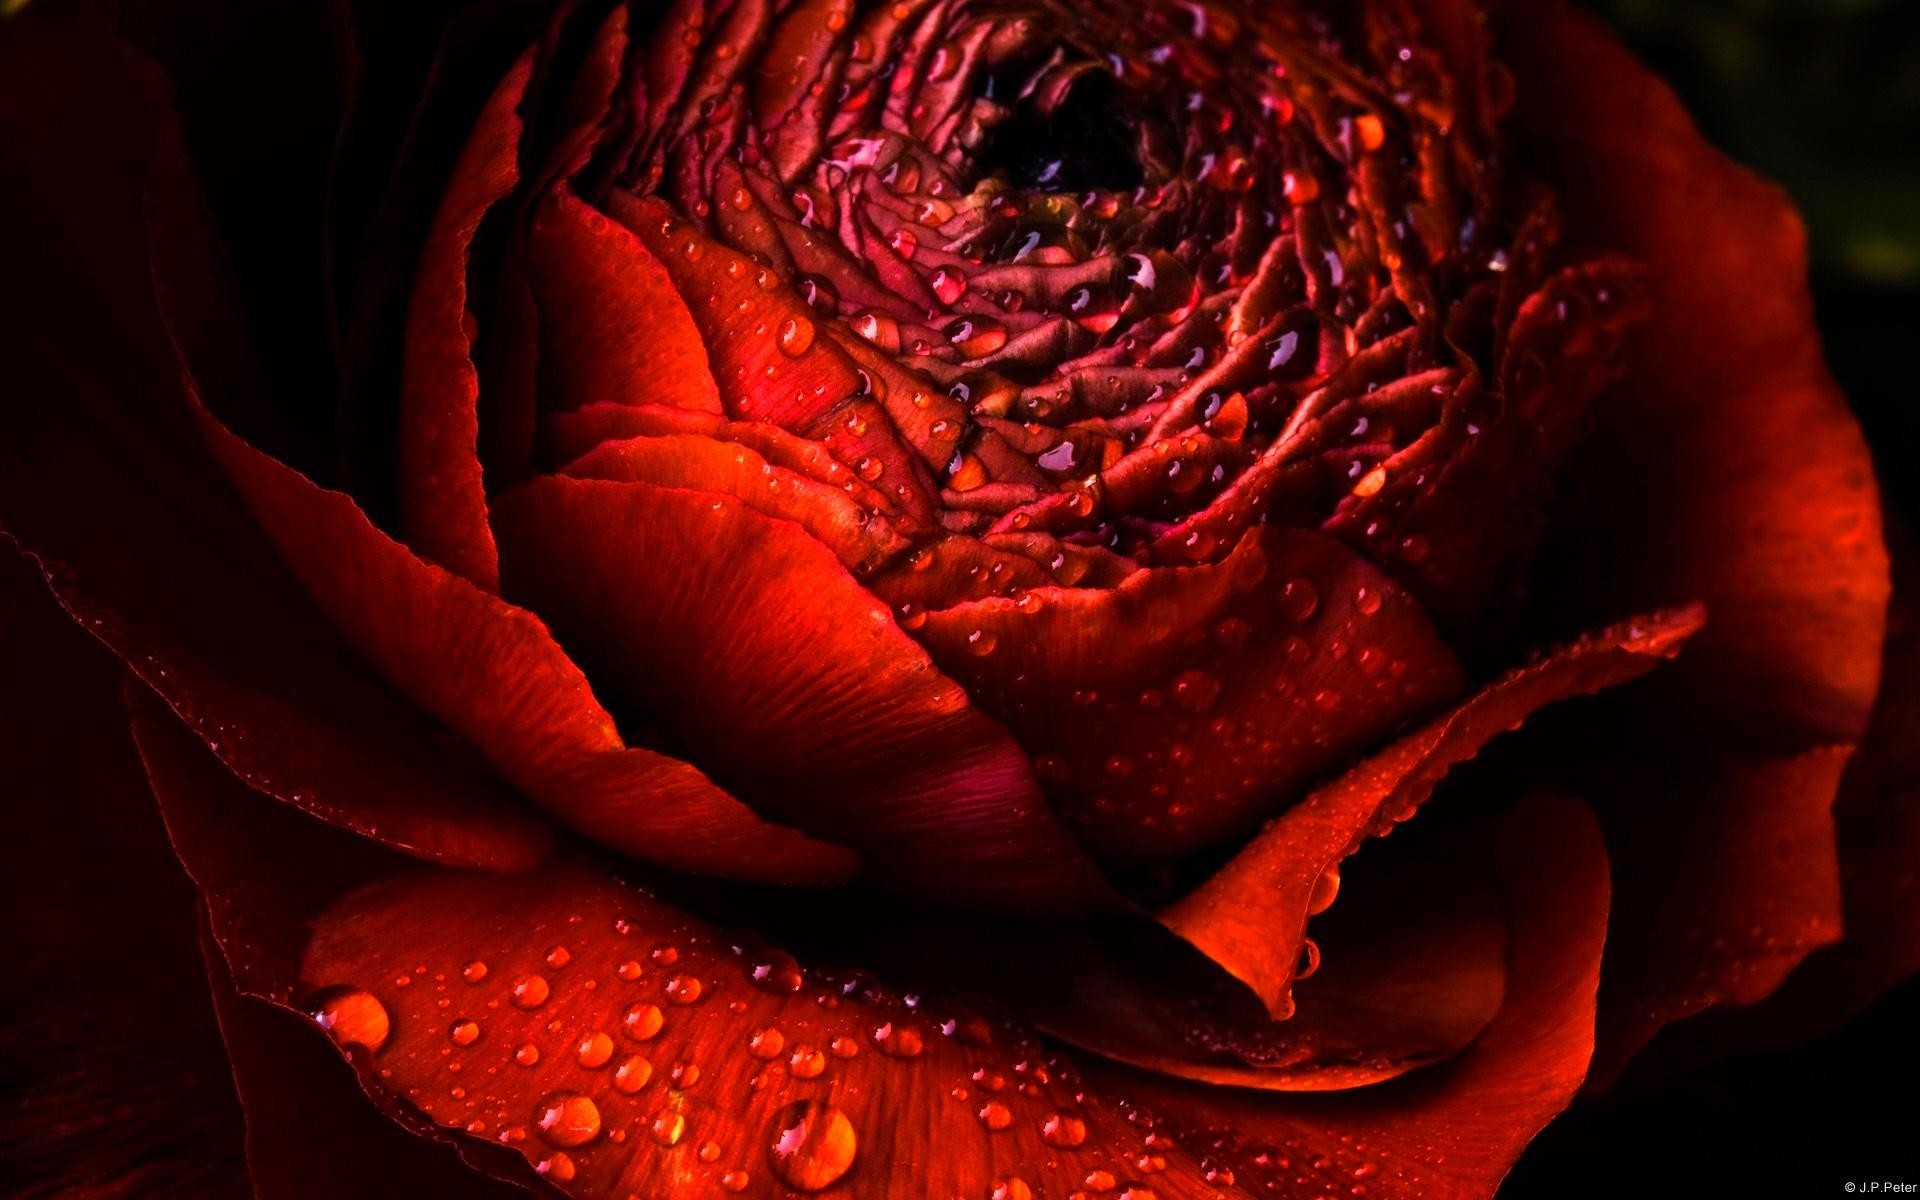 1920x1200 Roses Are Red HD Wide Wallpaper for Widescreen | wallpapers,themes,ect. |  Pinterest | Wallpaper, Definitions and Monitor